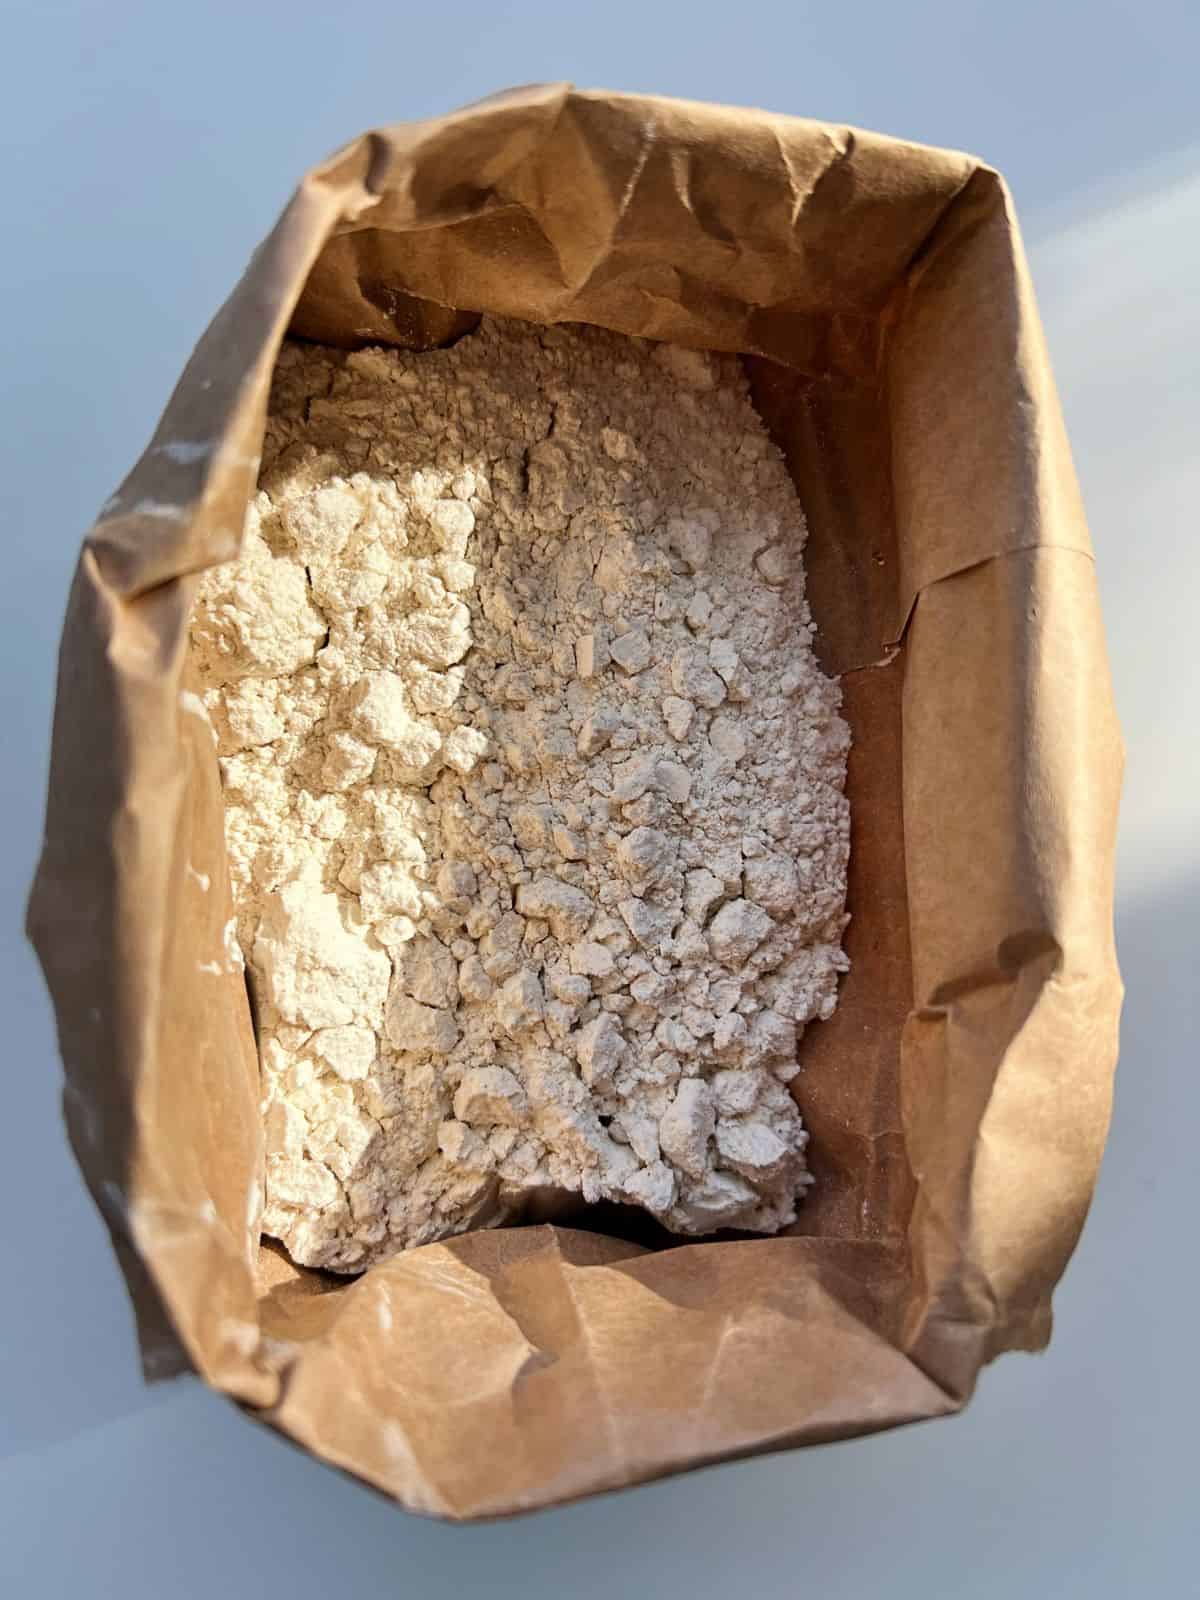 An image of whole wheat pastry flour in a brown paper bag.